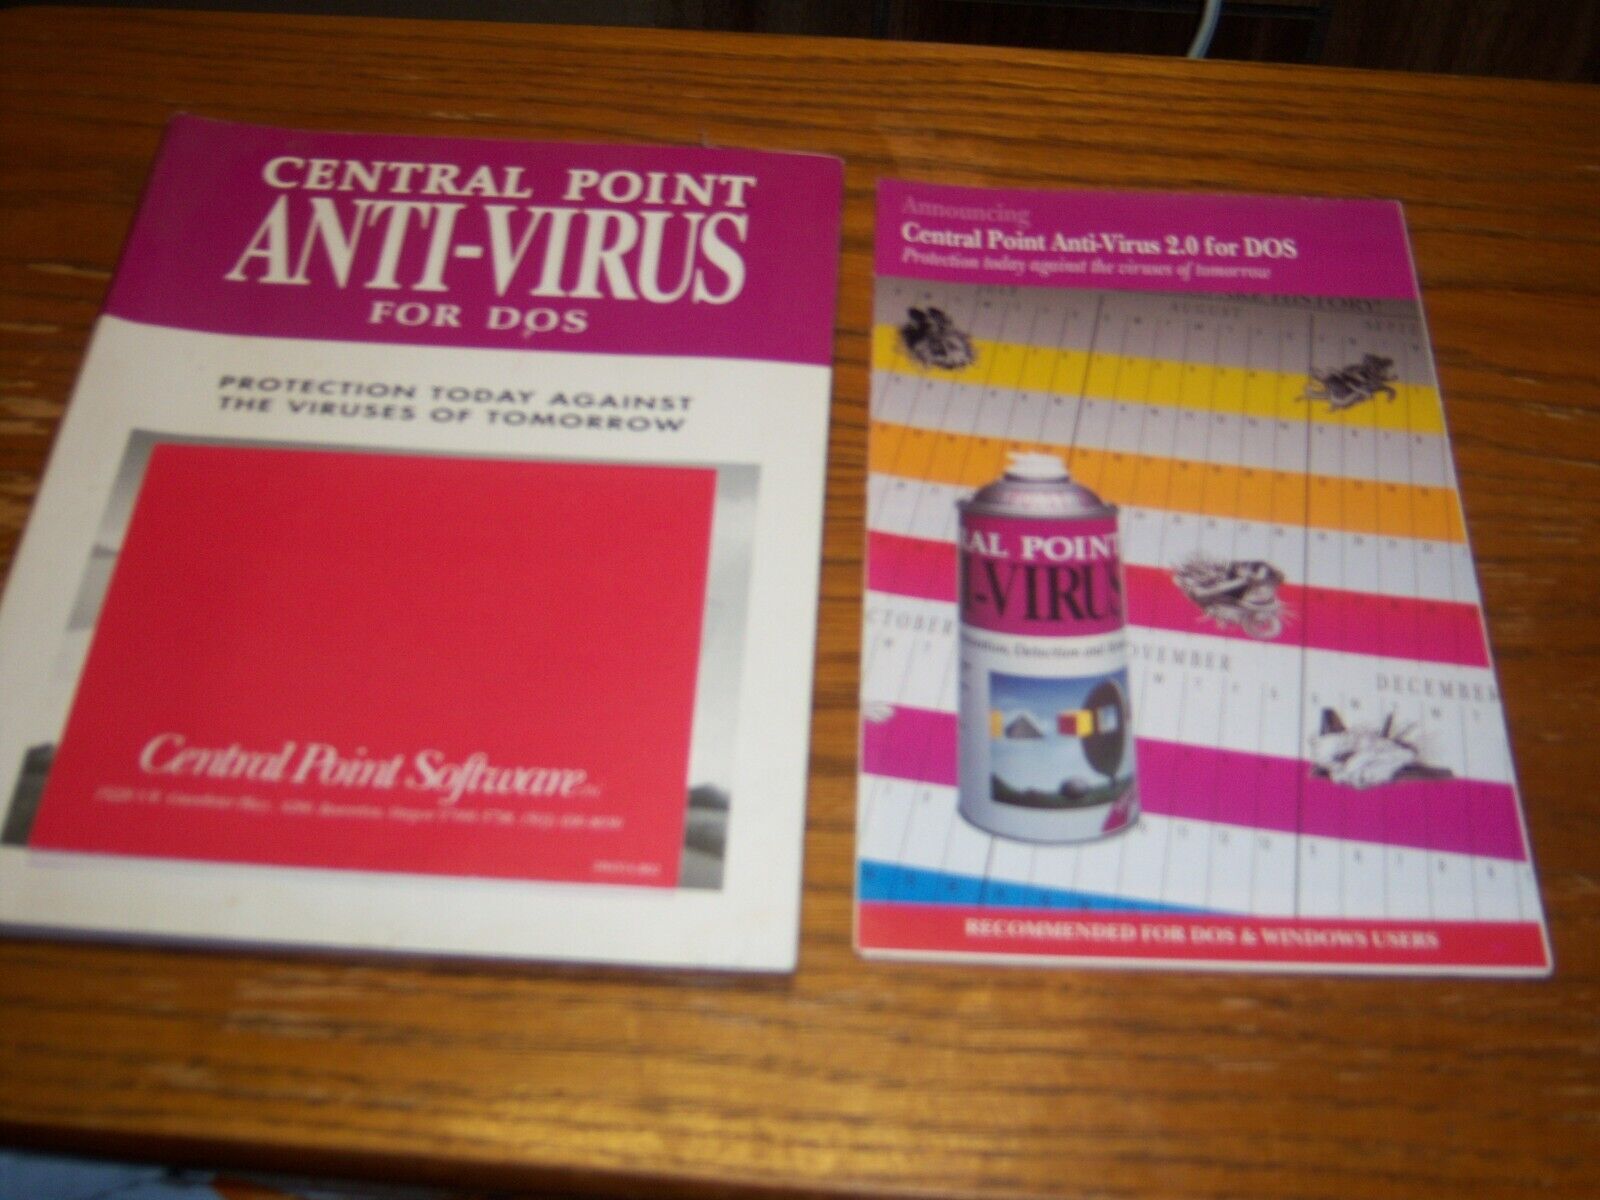 Central Point Anti-Virus Version 2.0 PC For DOS